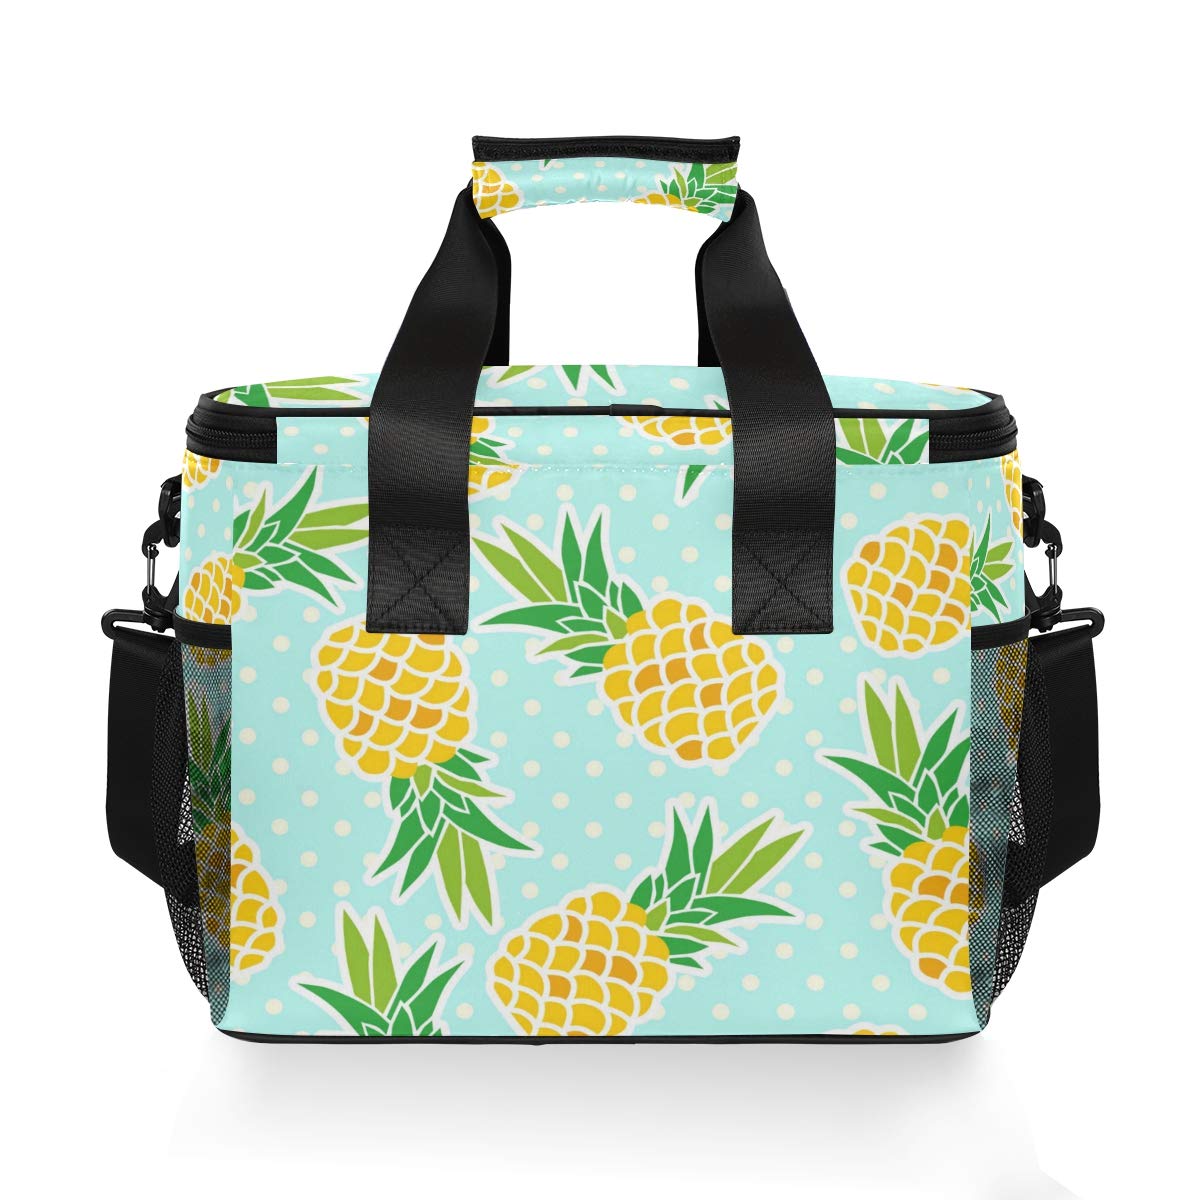 AUUXVA Picnic Lunch Bag Fruit Pineapple Lunch Cooler Box Insulated Portable Travel Large Picnic Basket Thermal Meal Food Container for Woman Man